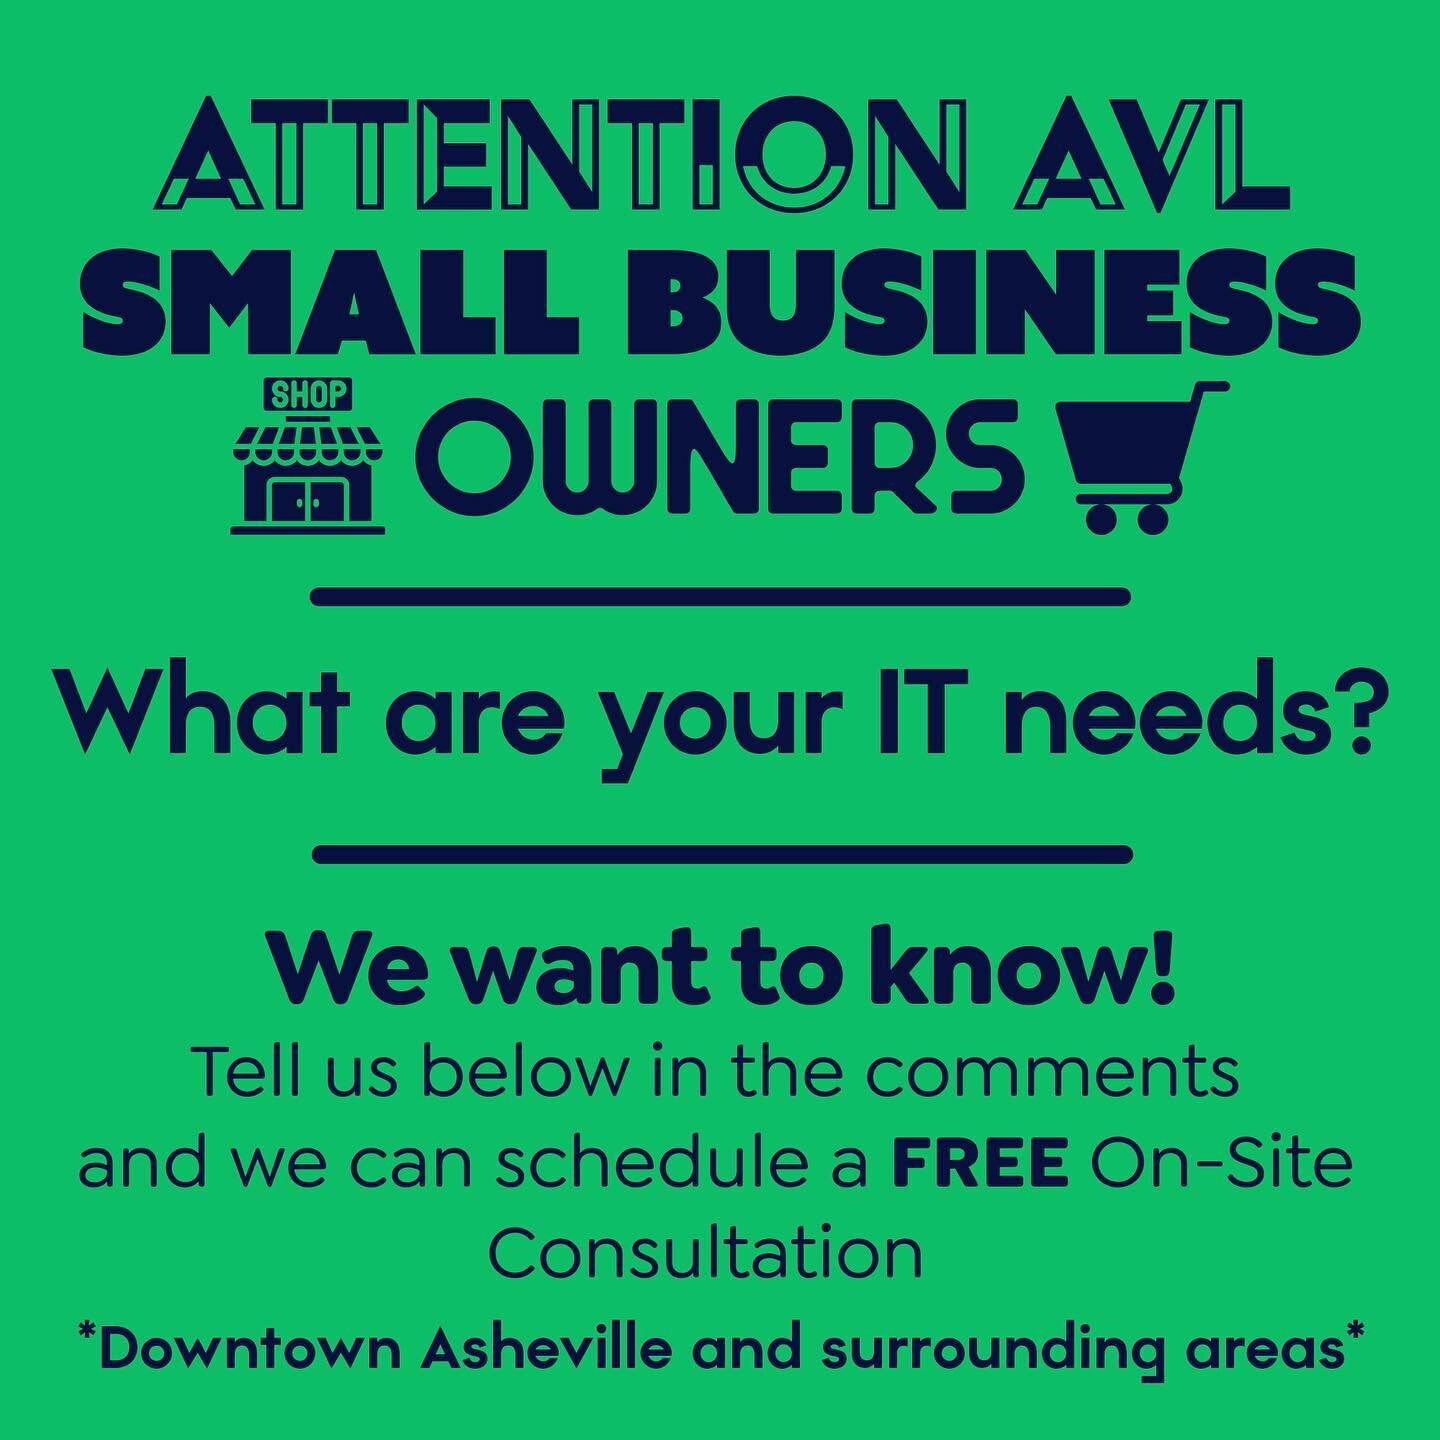 🚨SMALL BUSINESS ALERT🚨
We want to know the individualized IT needs of your business. In return, we&rsquo;ll come out and give you a FREE consultation. Call it market research, or we just may be able to put our heads together and come up a viable so